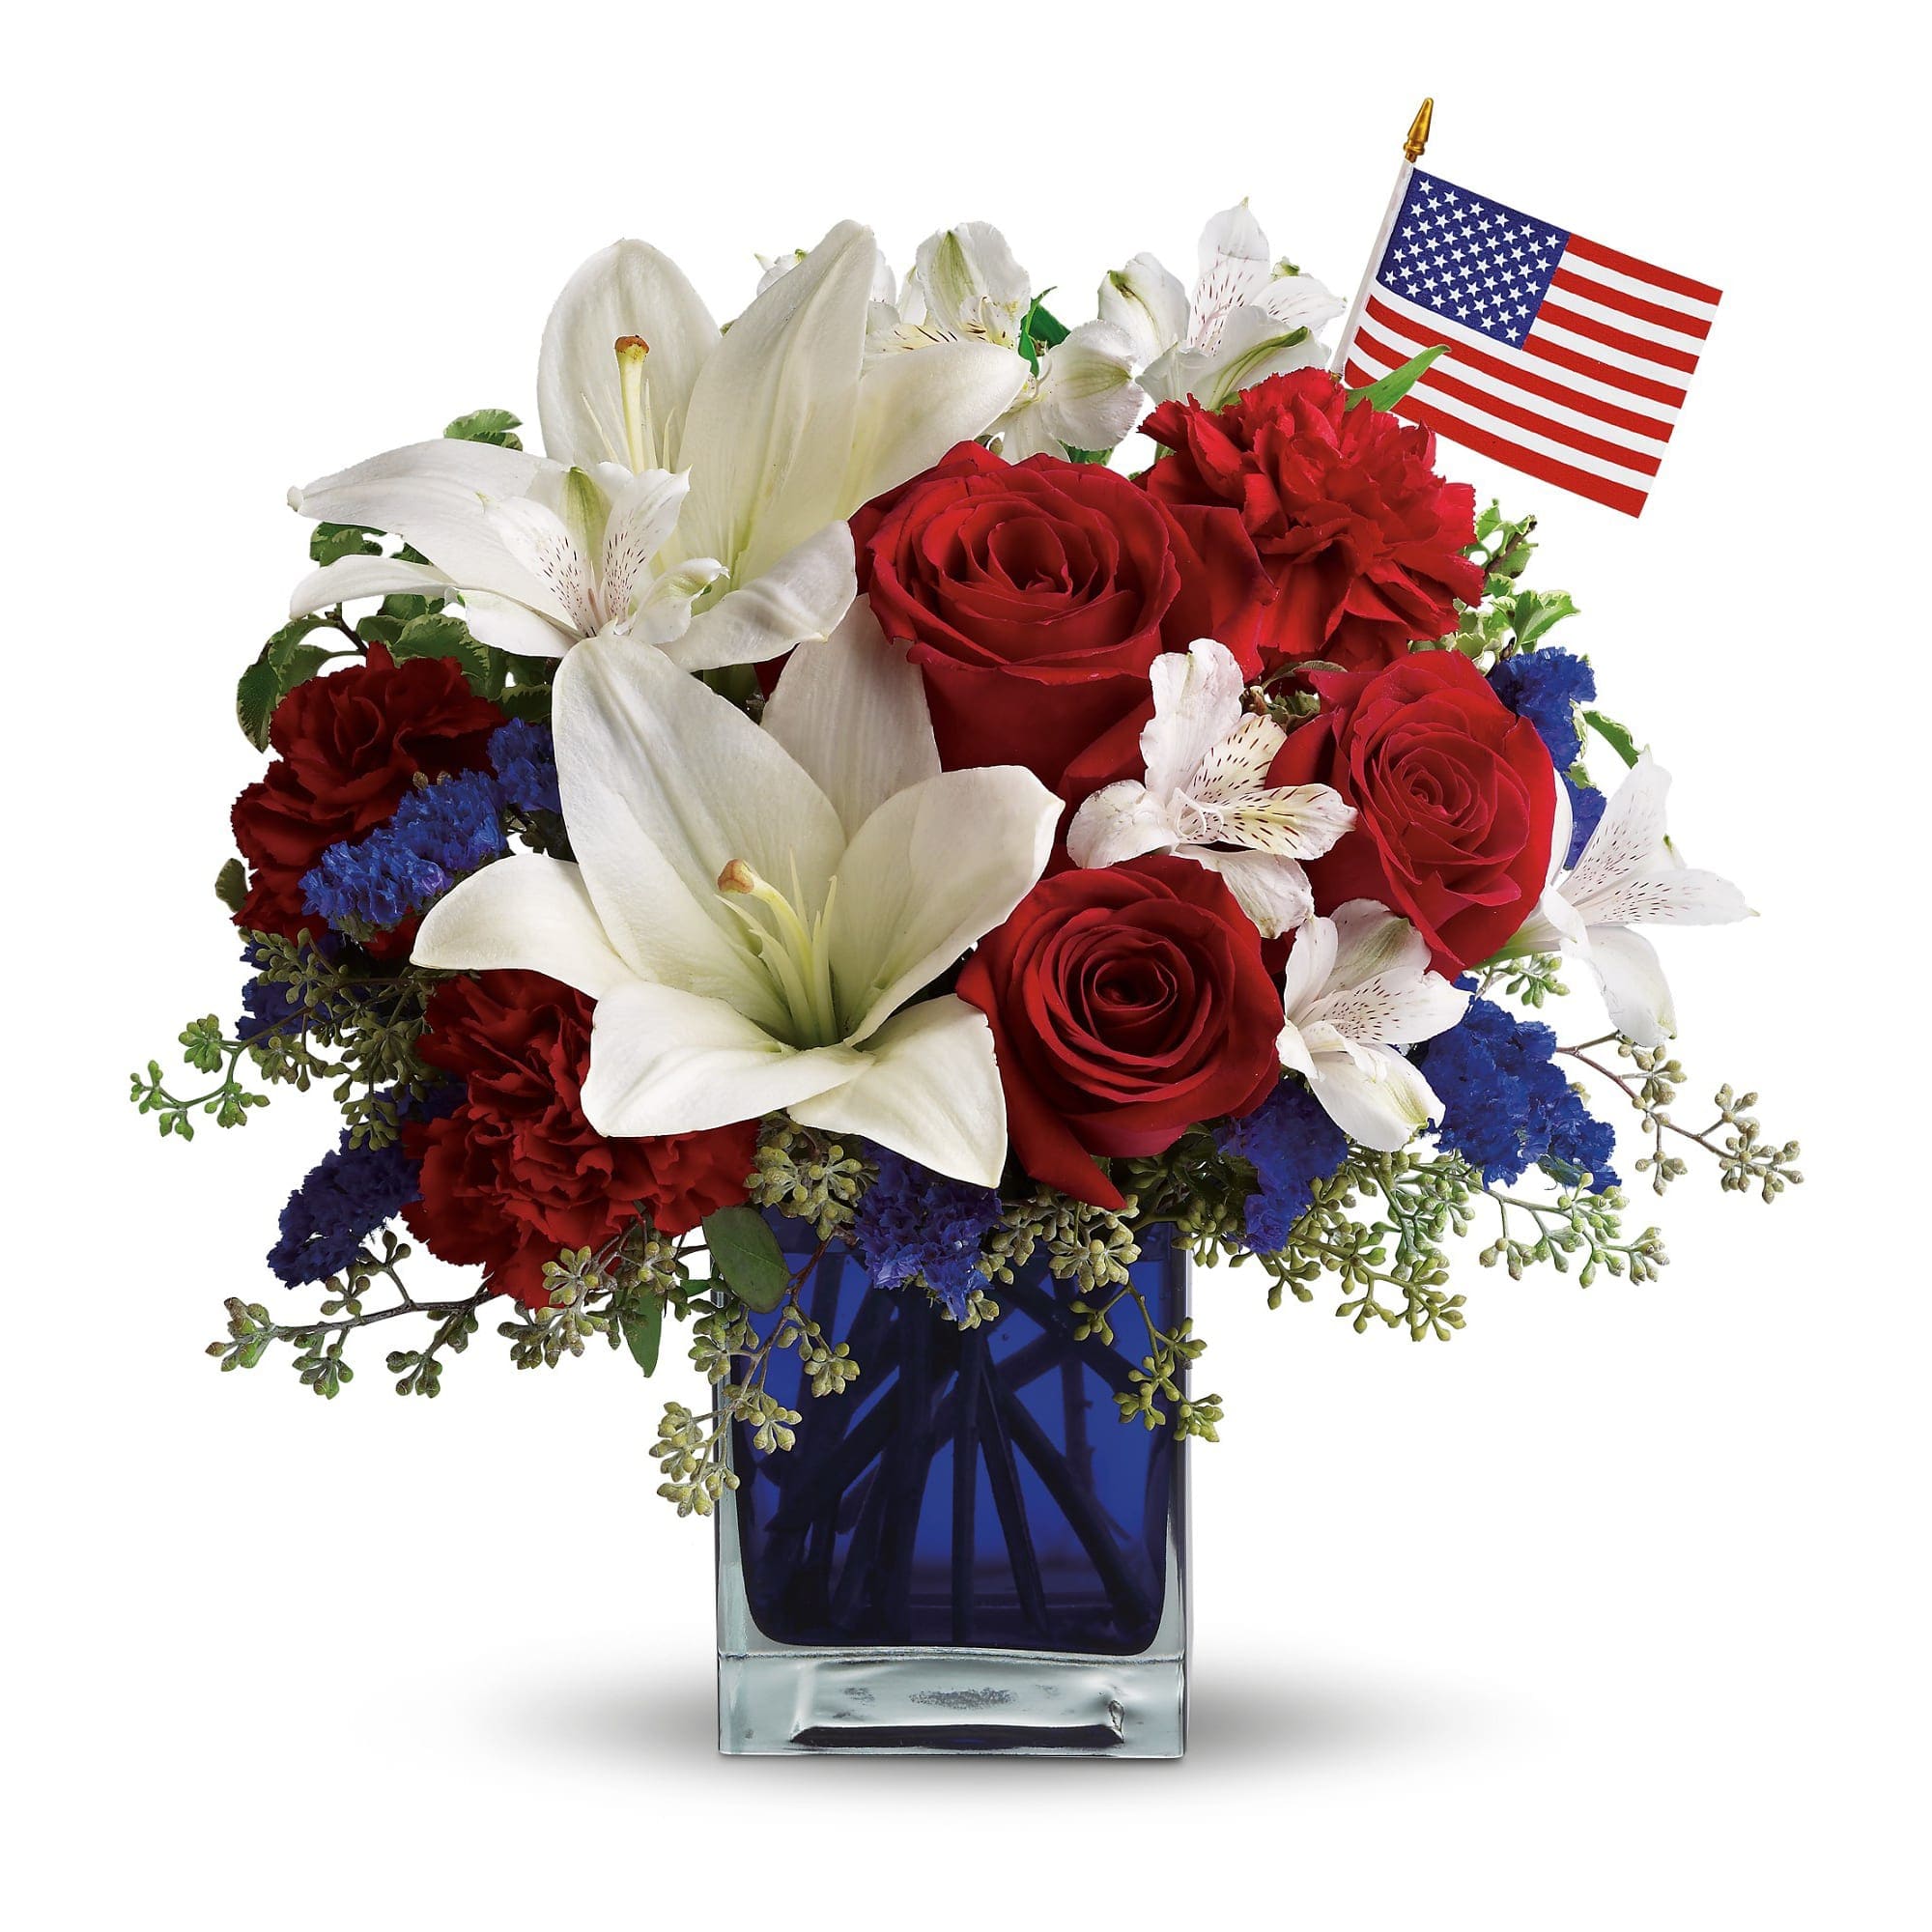 America the Beautiful by Teleflora - This patriotic arrangement is such a stunning way to honor the courage, the character, the people and the places in this country we call home.